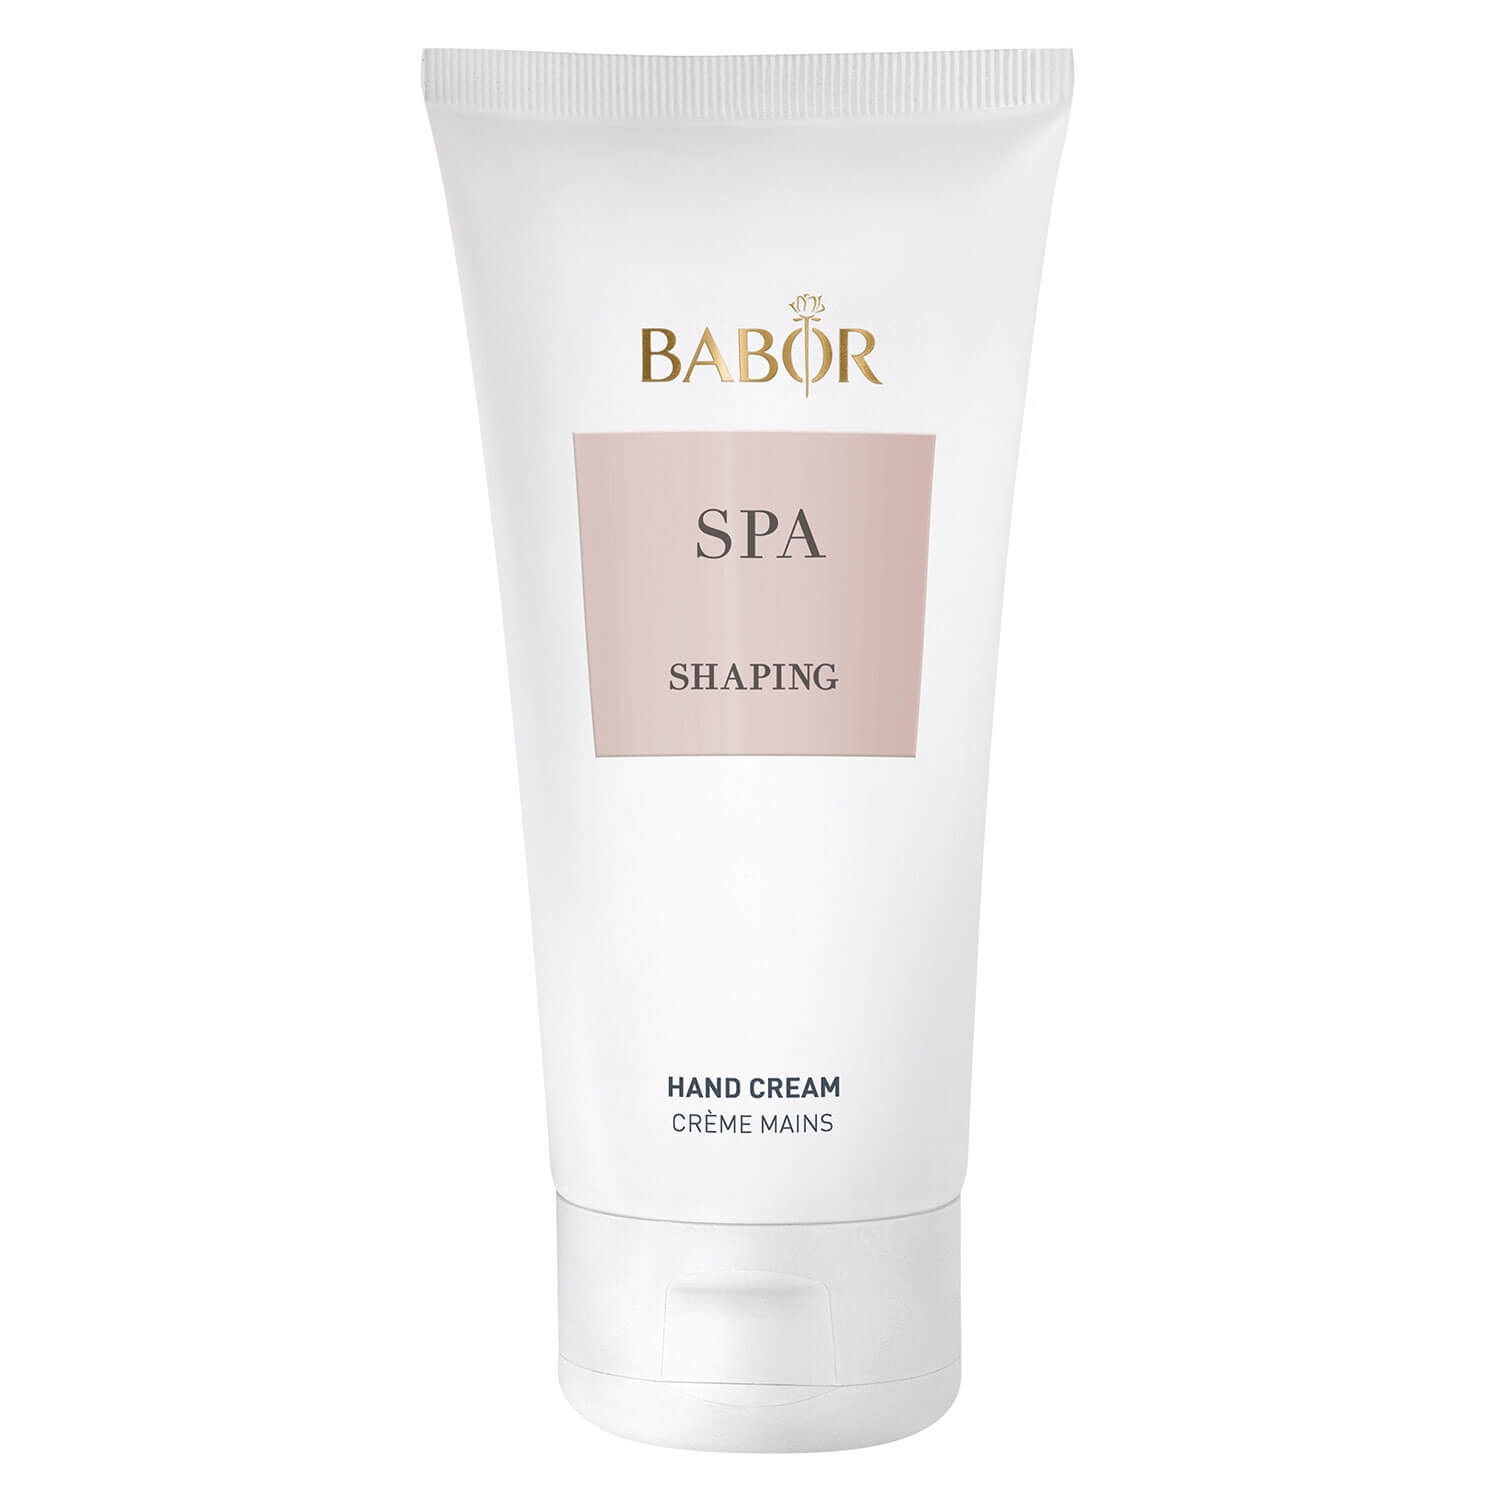 Product image from BABOR SPA - Shaping Hand Cream